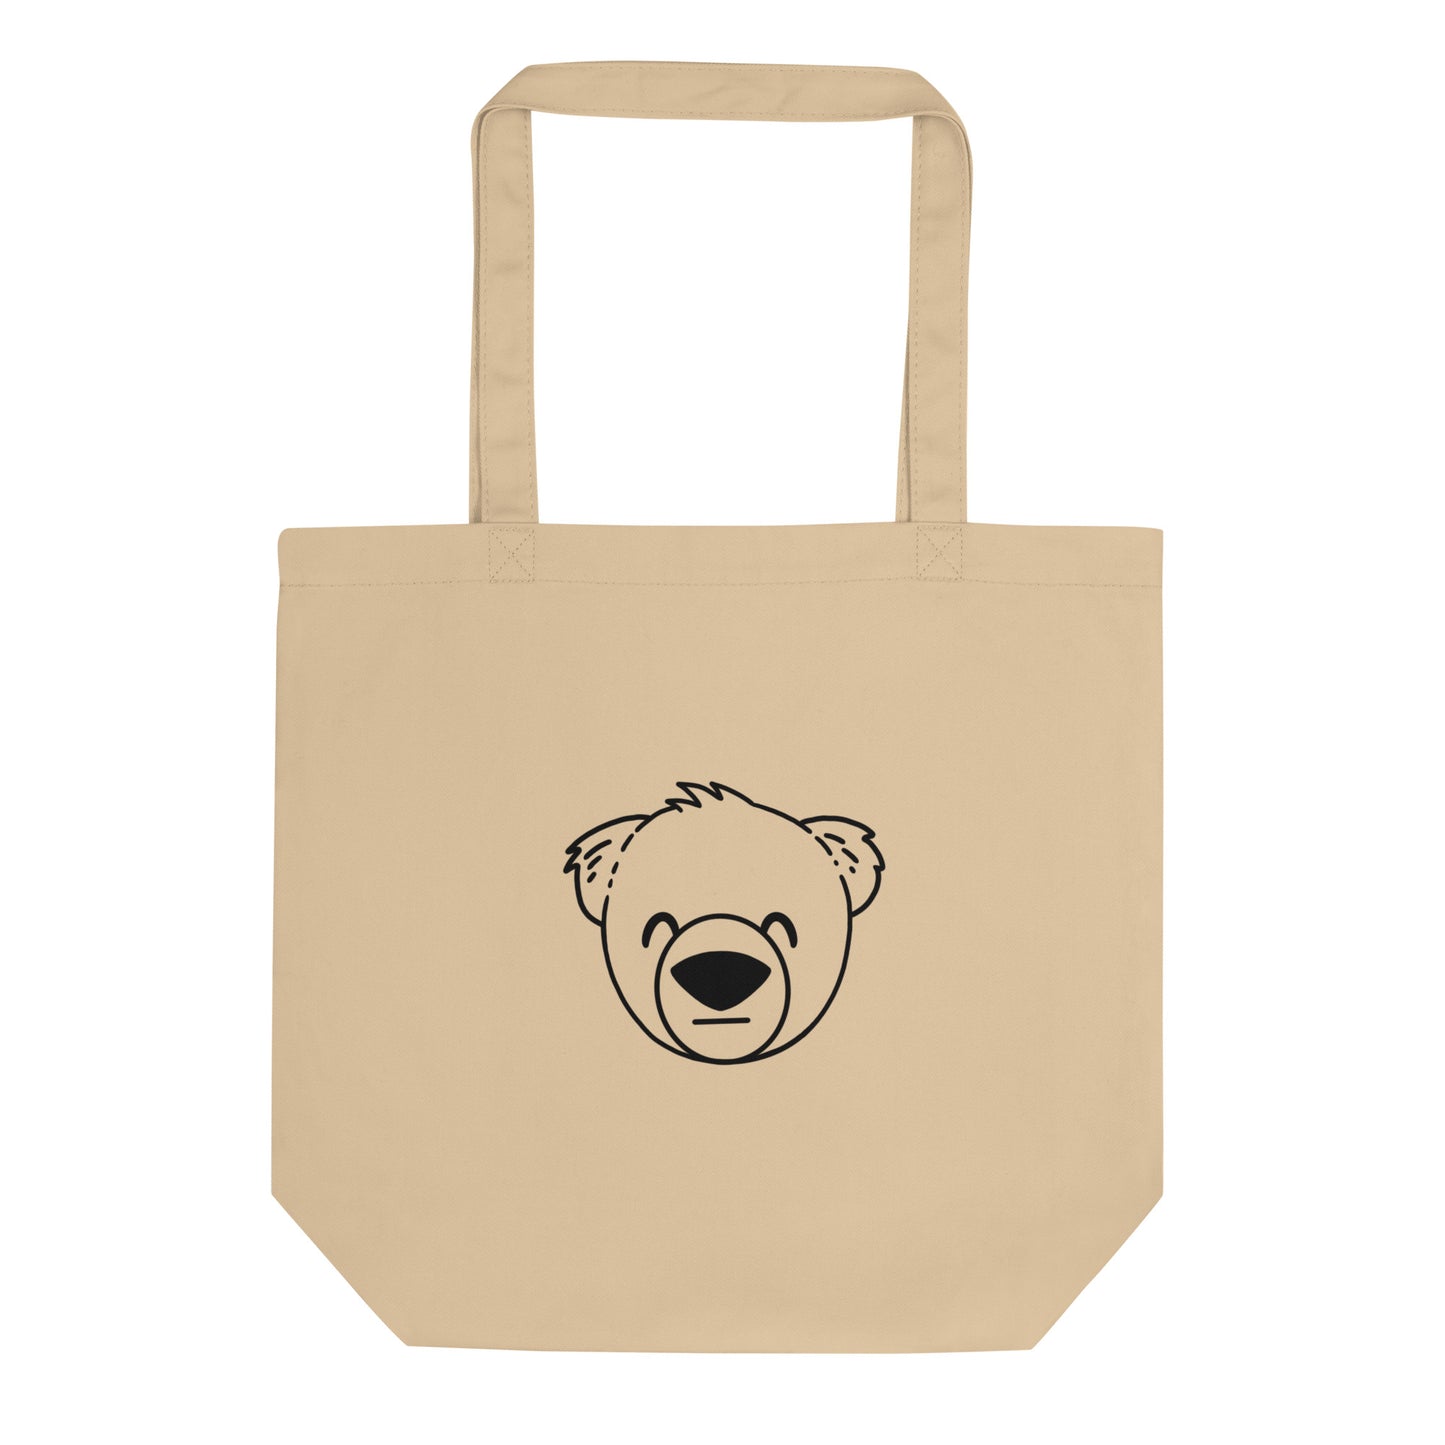 Autism Acceptance Tote Bag (Oyster)